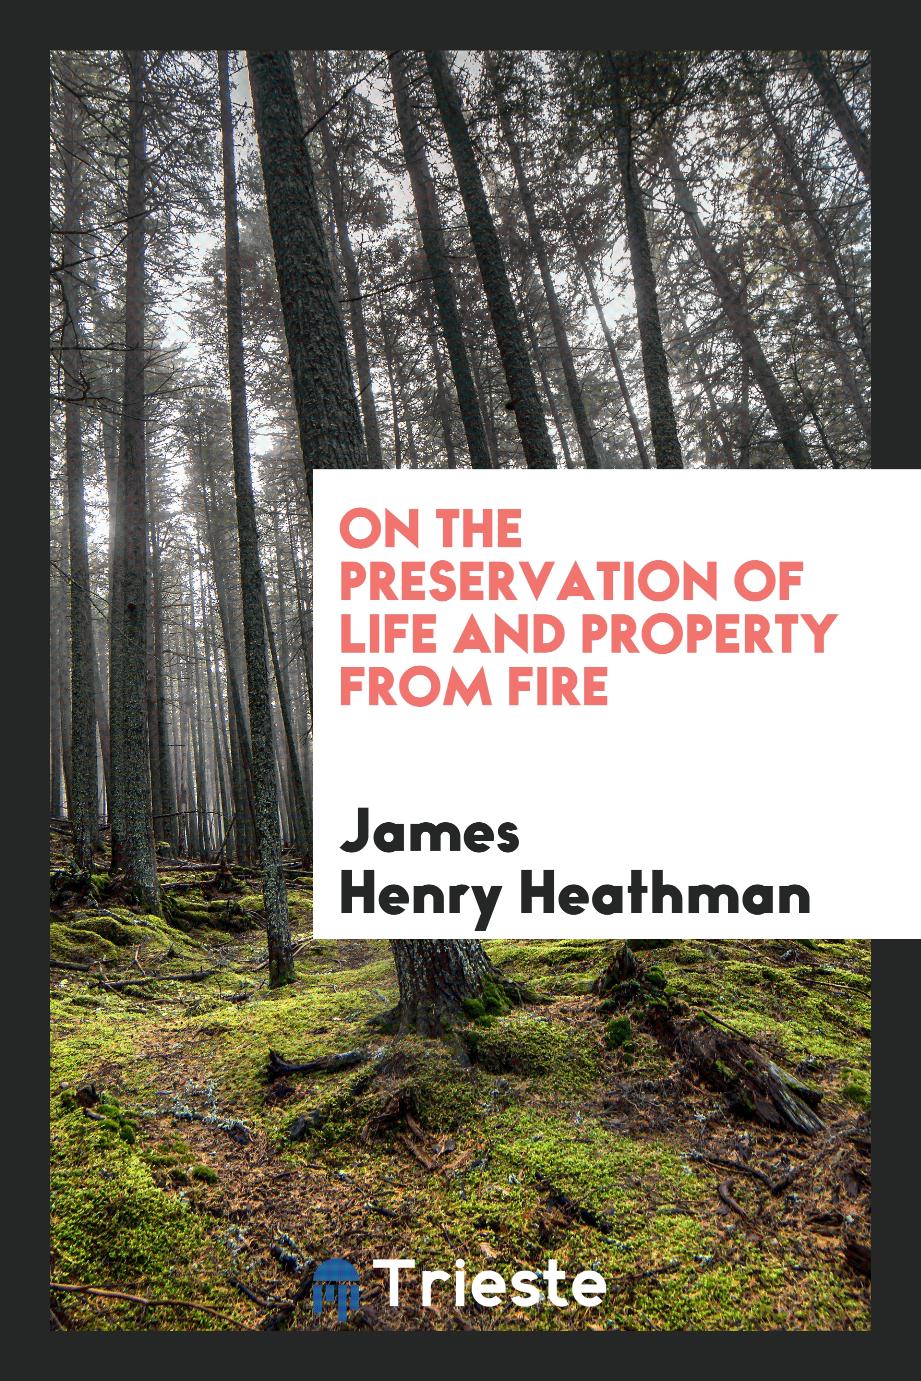 On the Preservation of Life and Property from Fire